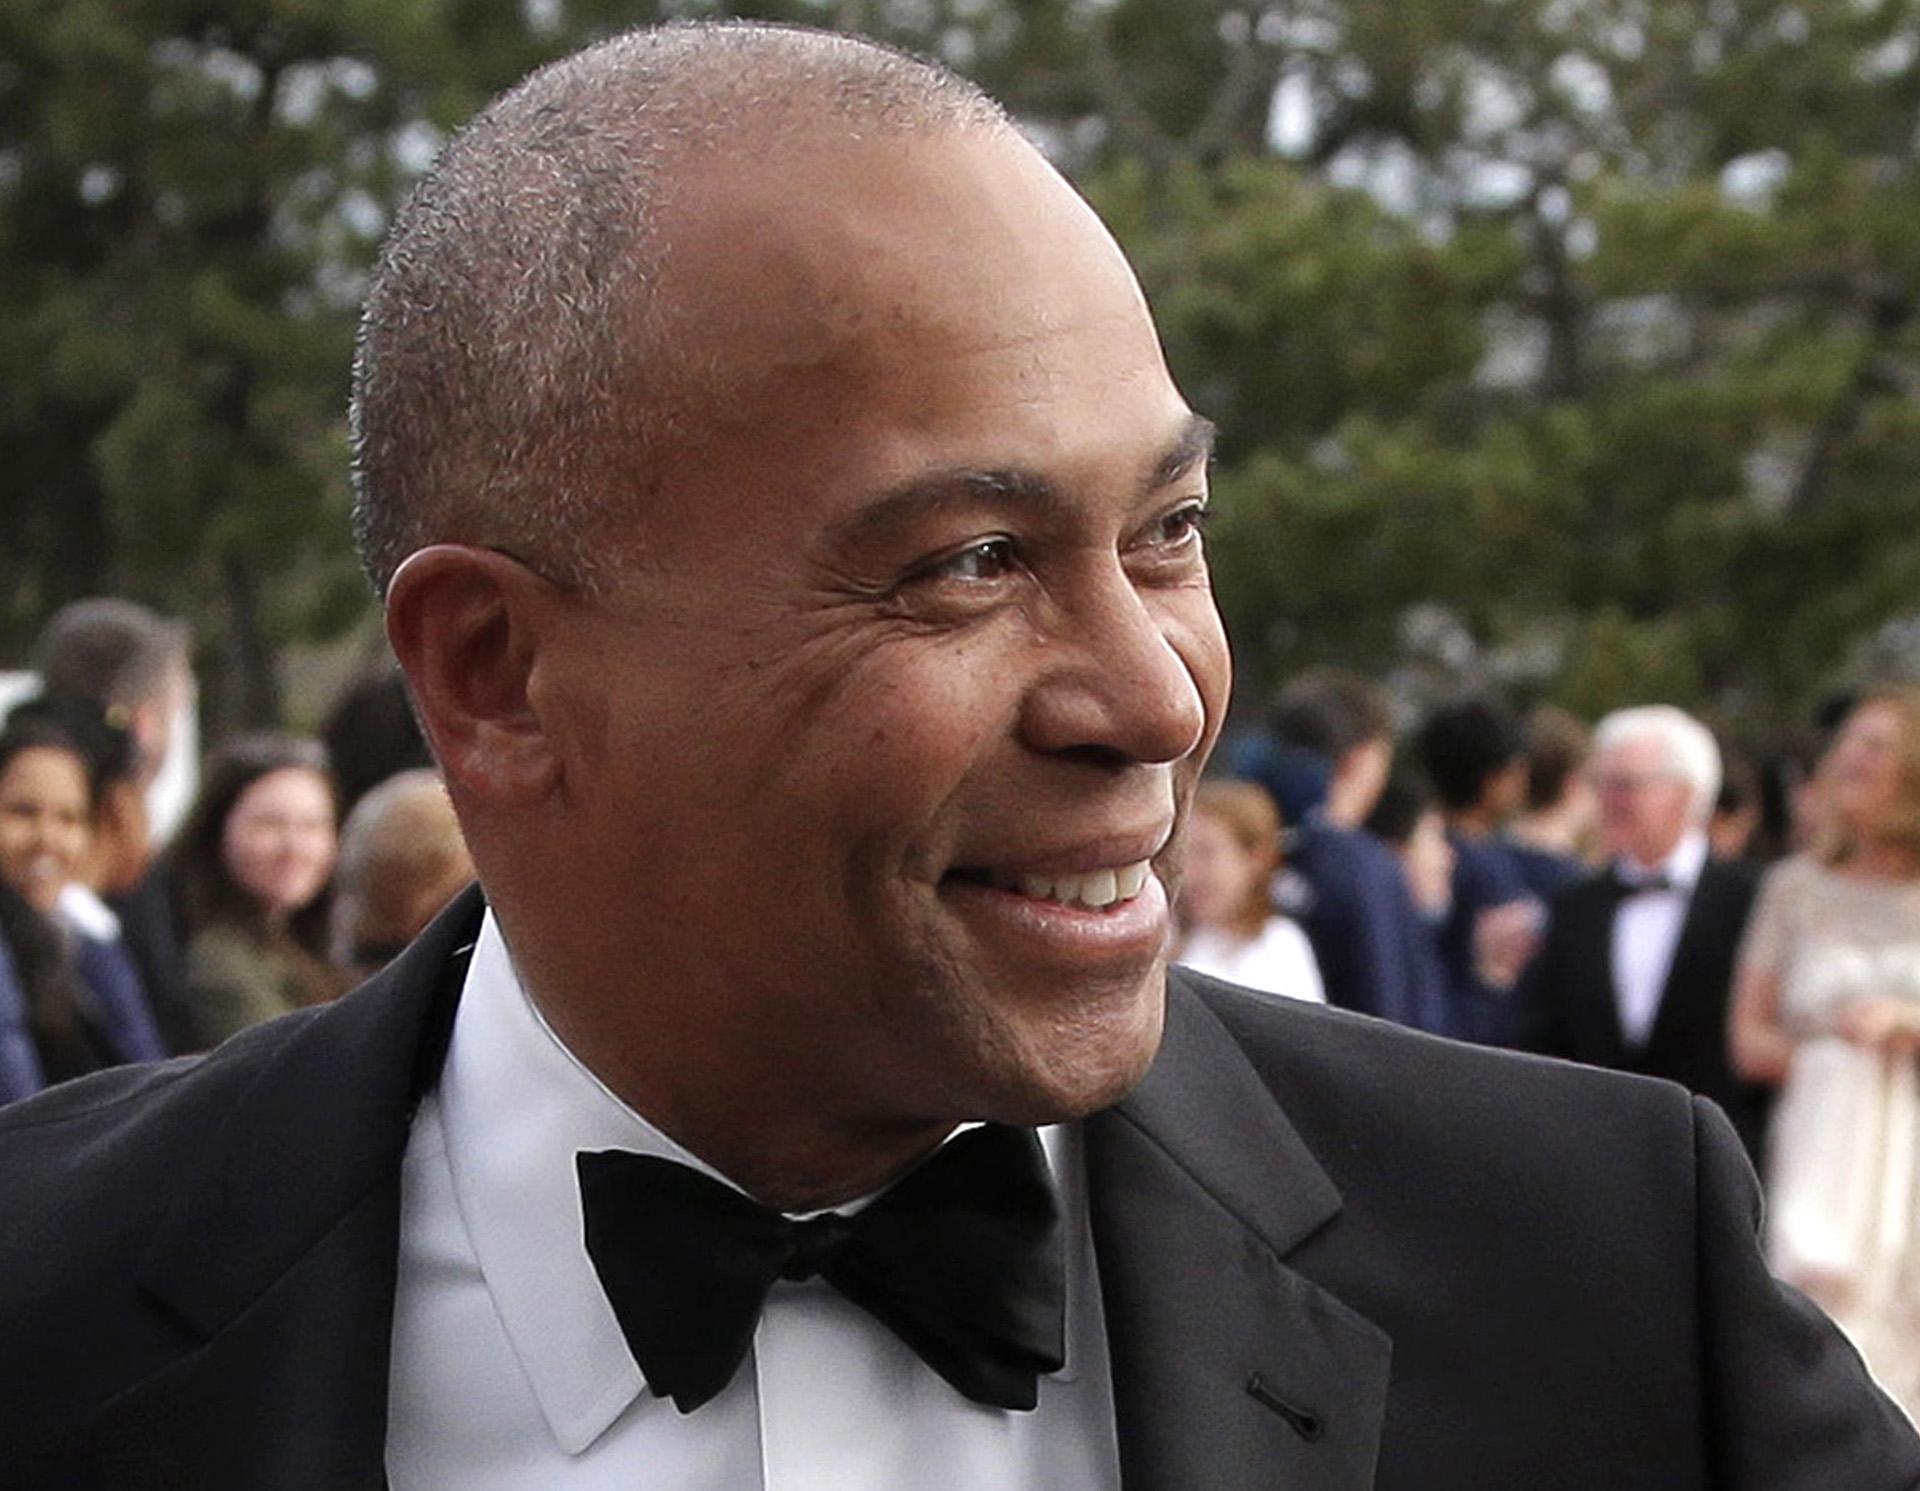 In this May 7, 2017 file photo, former Massachusetts Gov. Deval Patrick arrives at the John F. Kennedy Presidential Library and Museum in Boston for the 2017 Profile in Courage award ceremony.  (AP Photo / Steven Senne, File)